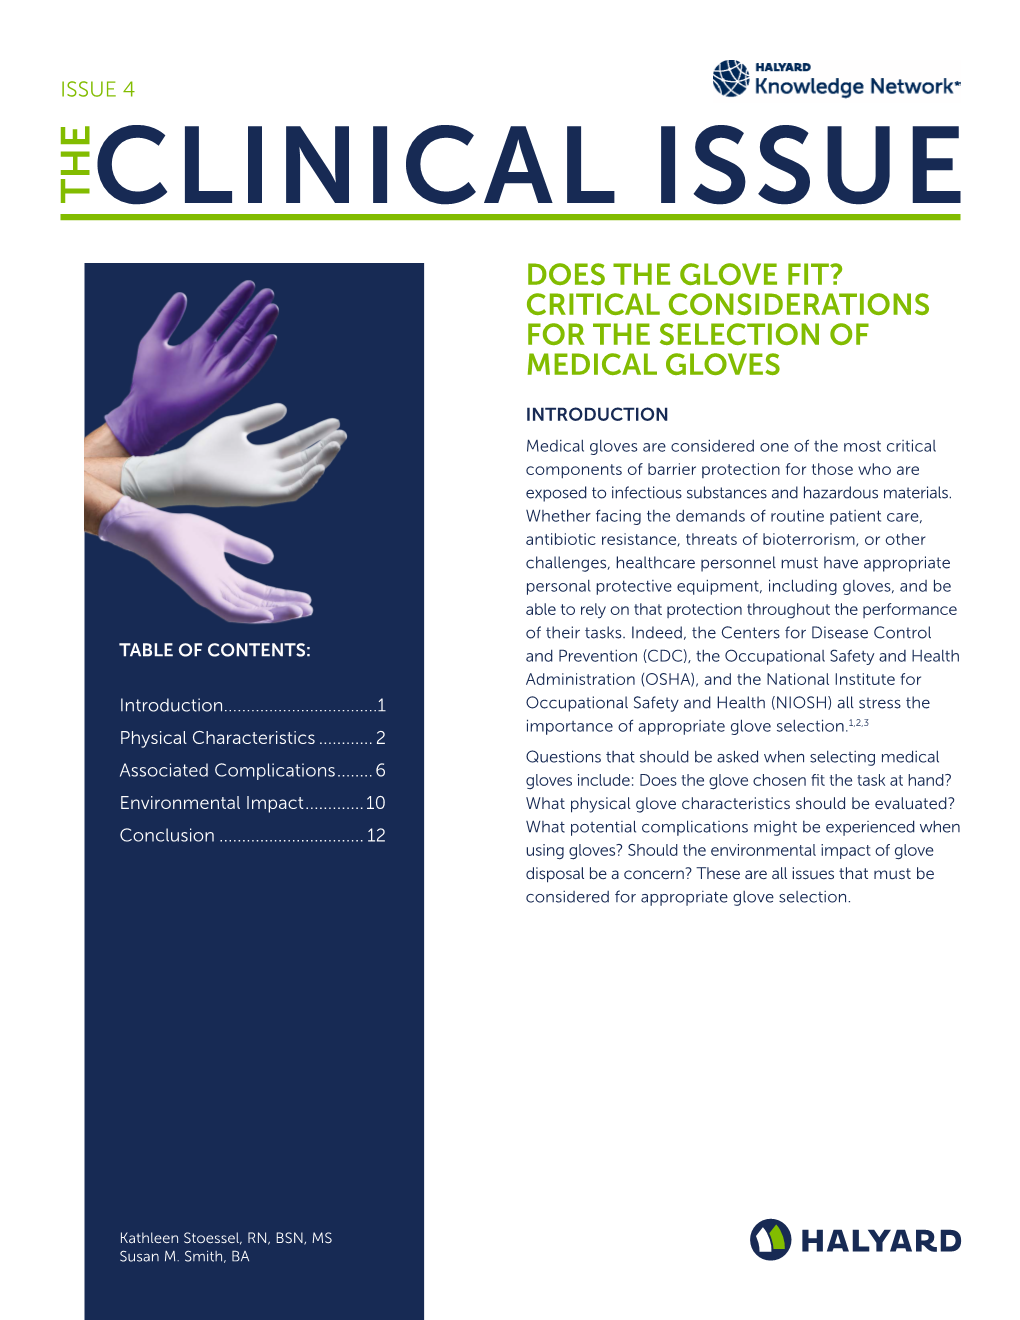 Clinical Issue